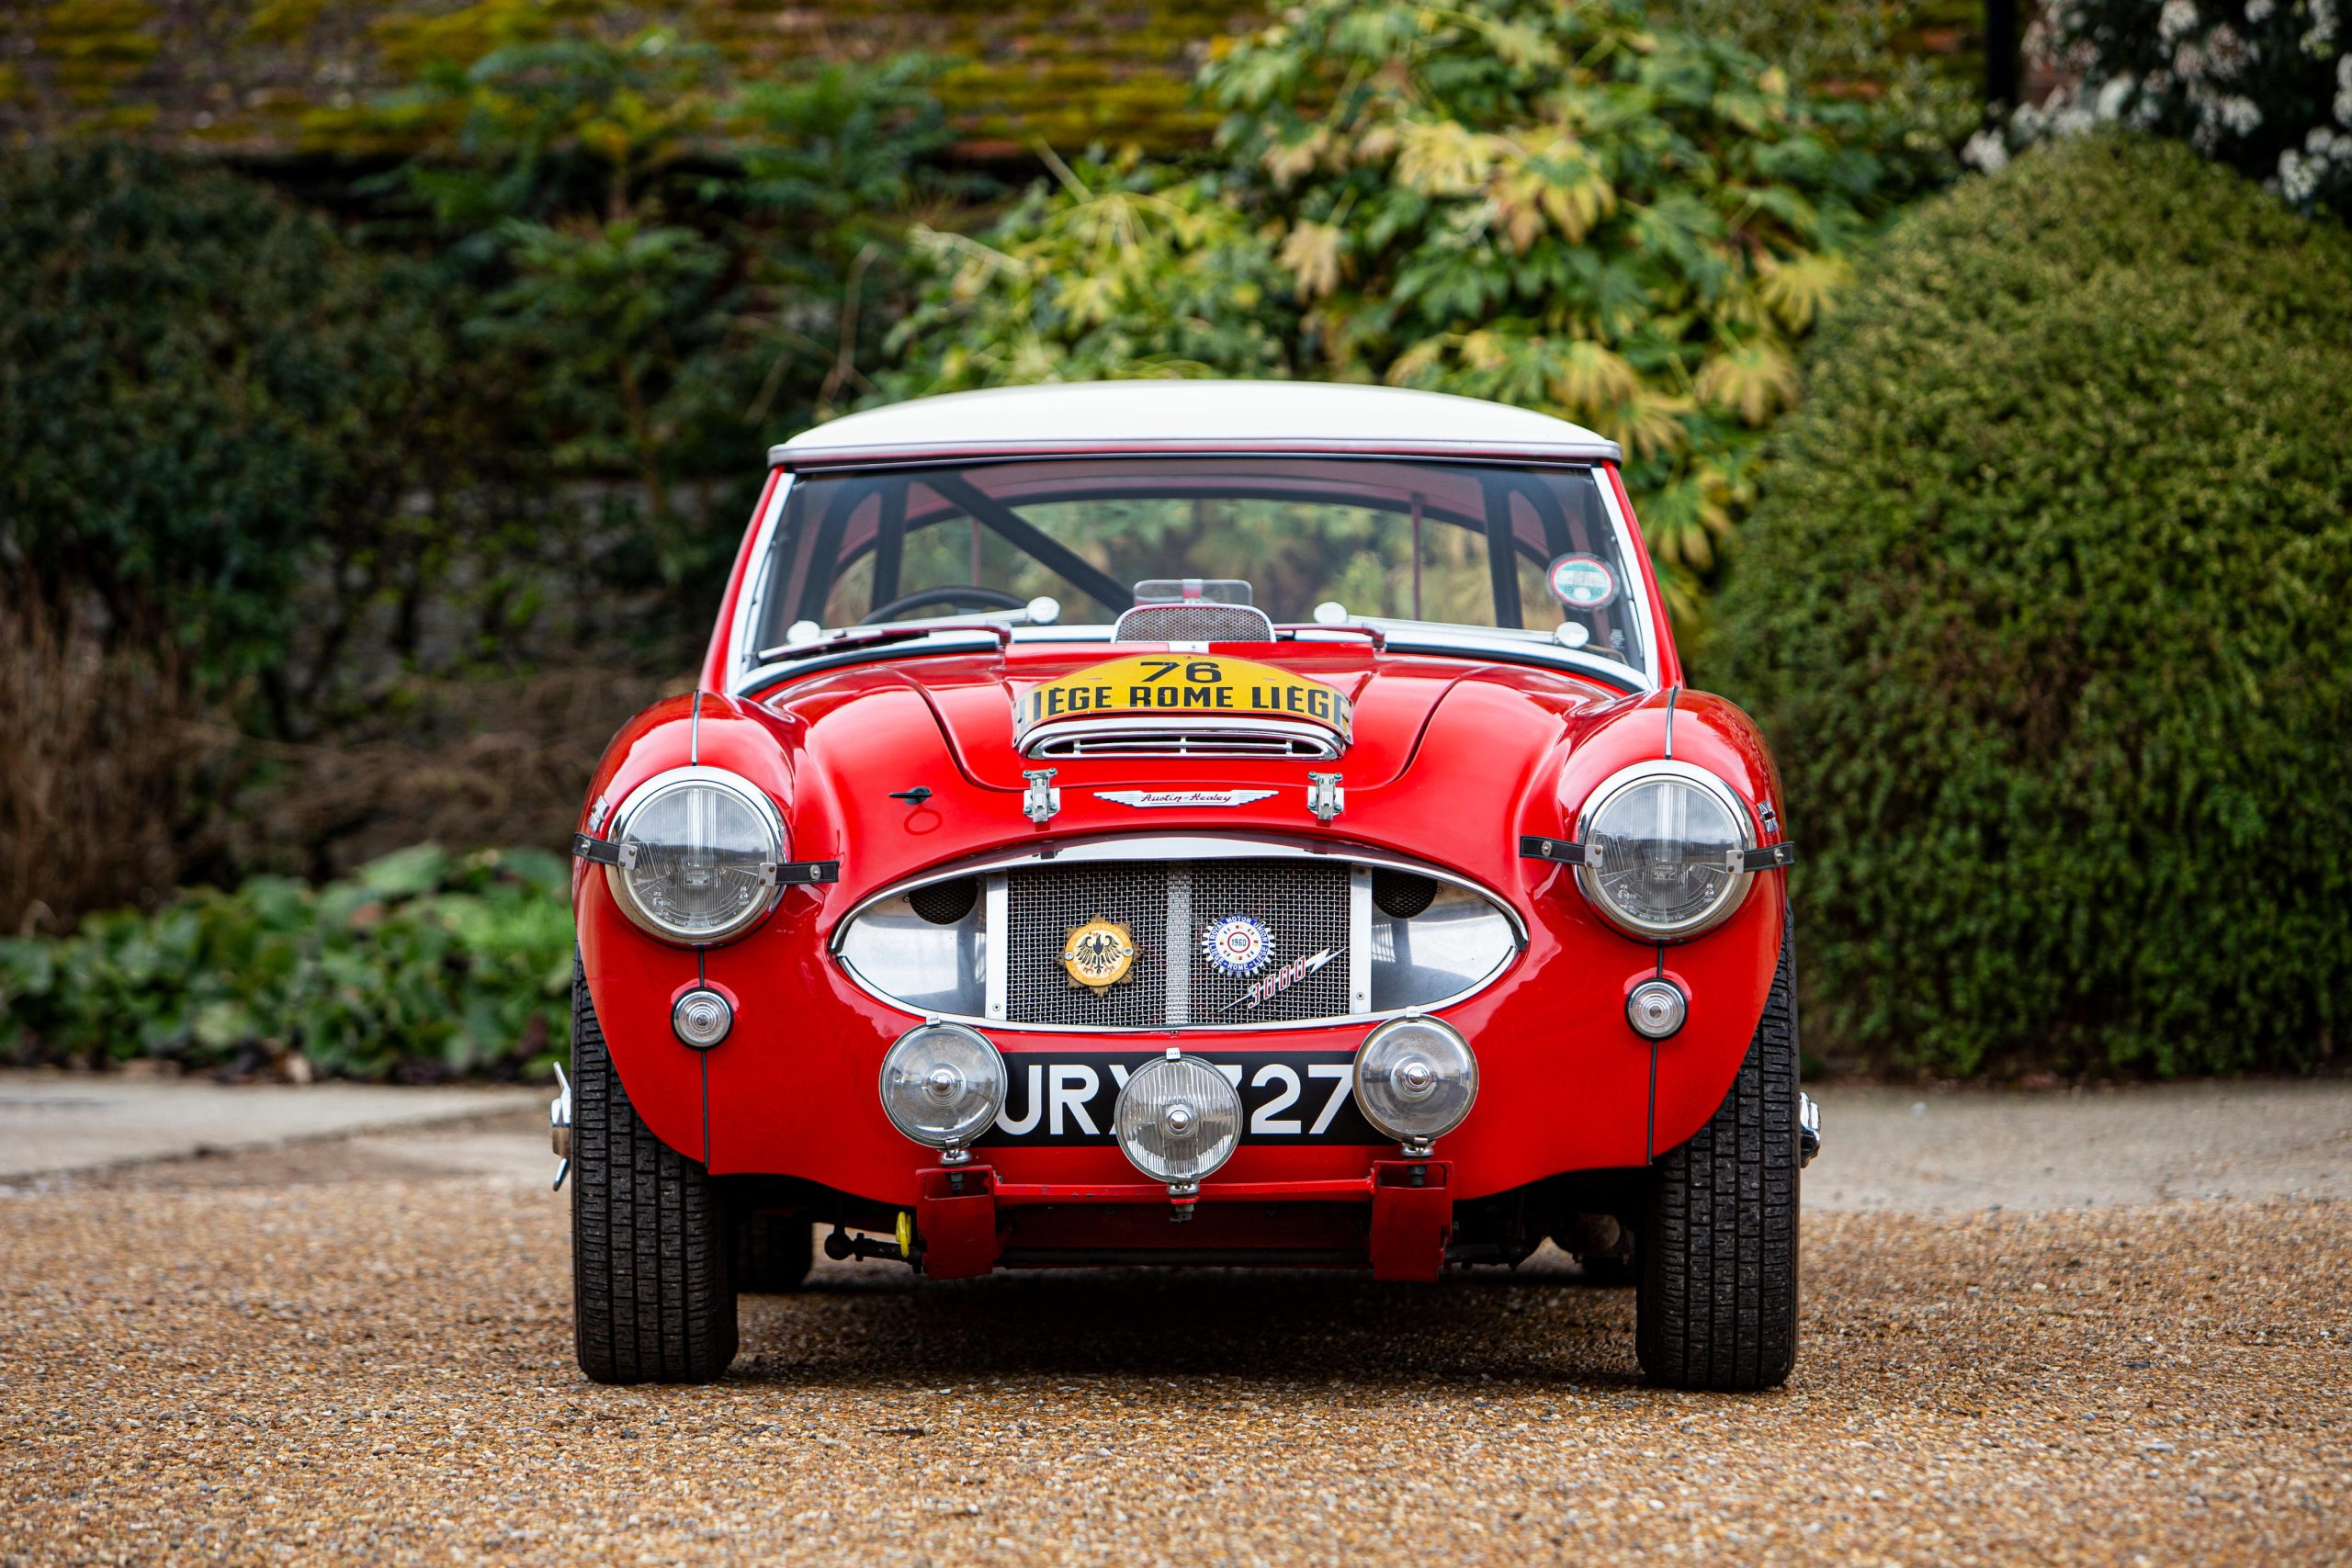 Who will answer the rallying cry for this ex-Pat Moss Austin-Healey?